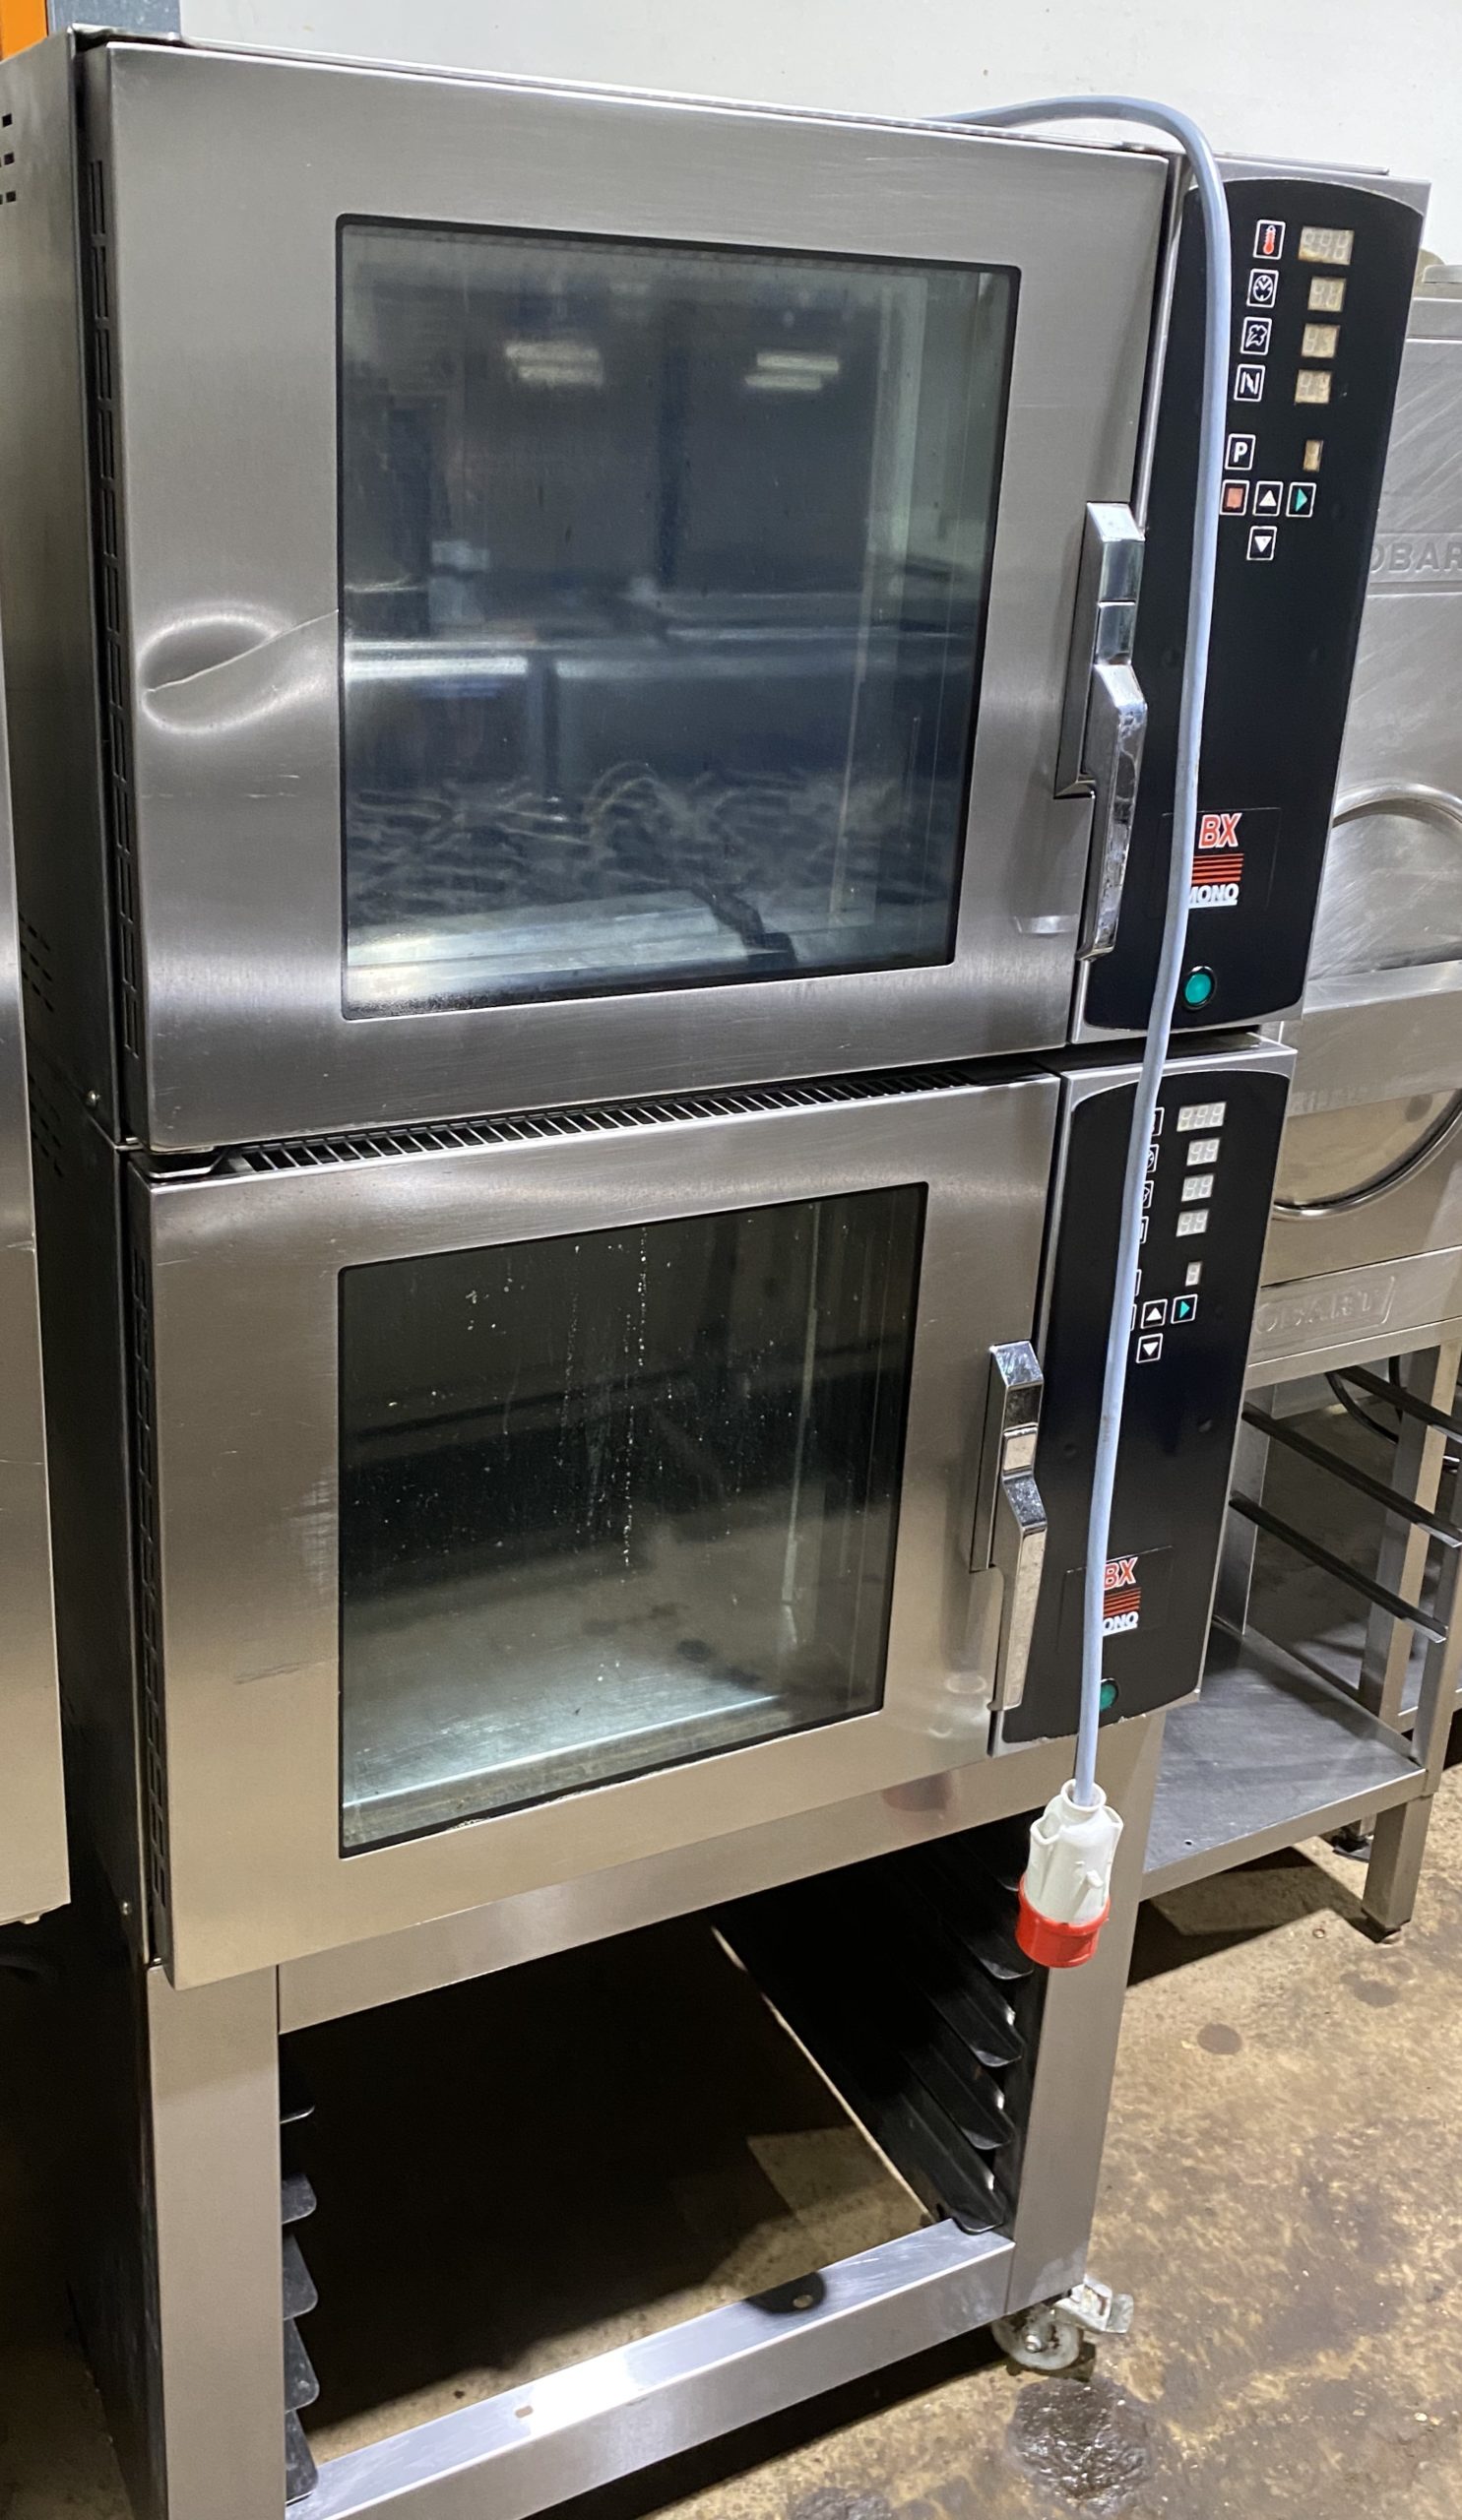 MONO stacked pair BX Bake Off Convection Ovens with Stand